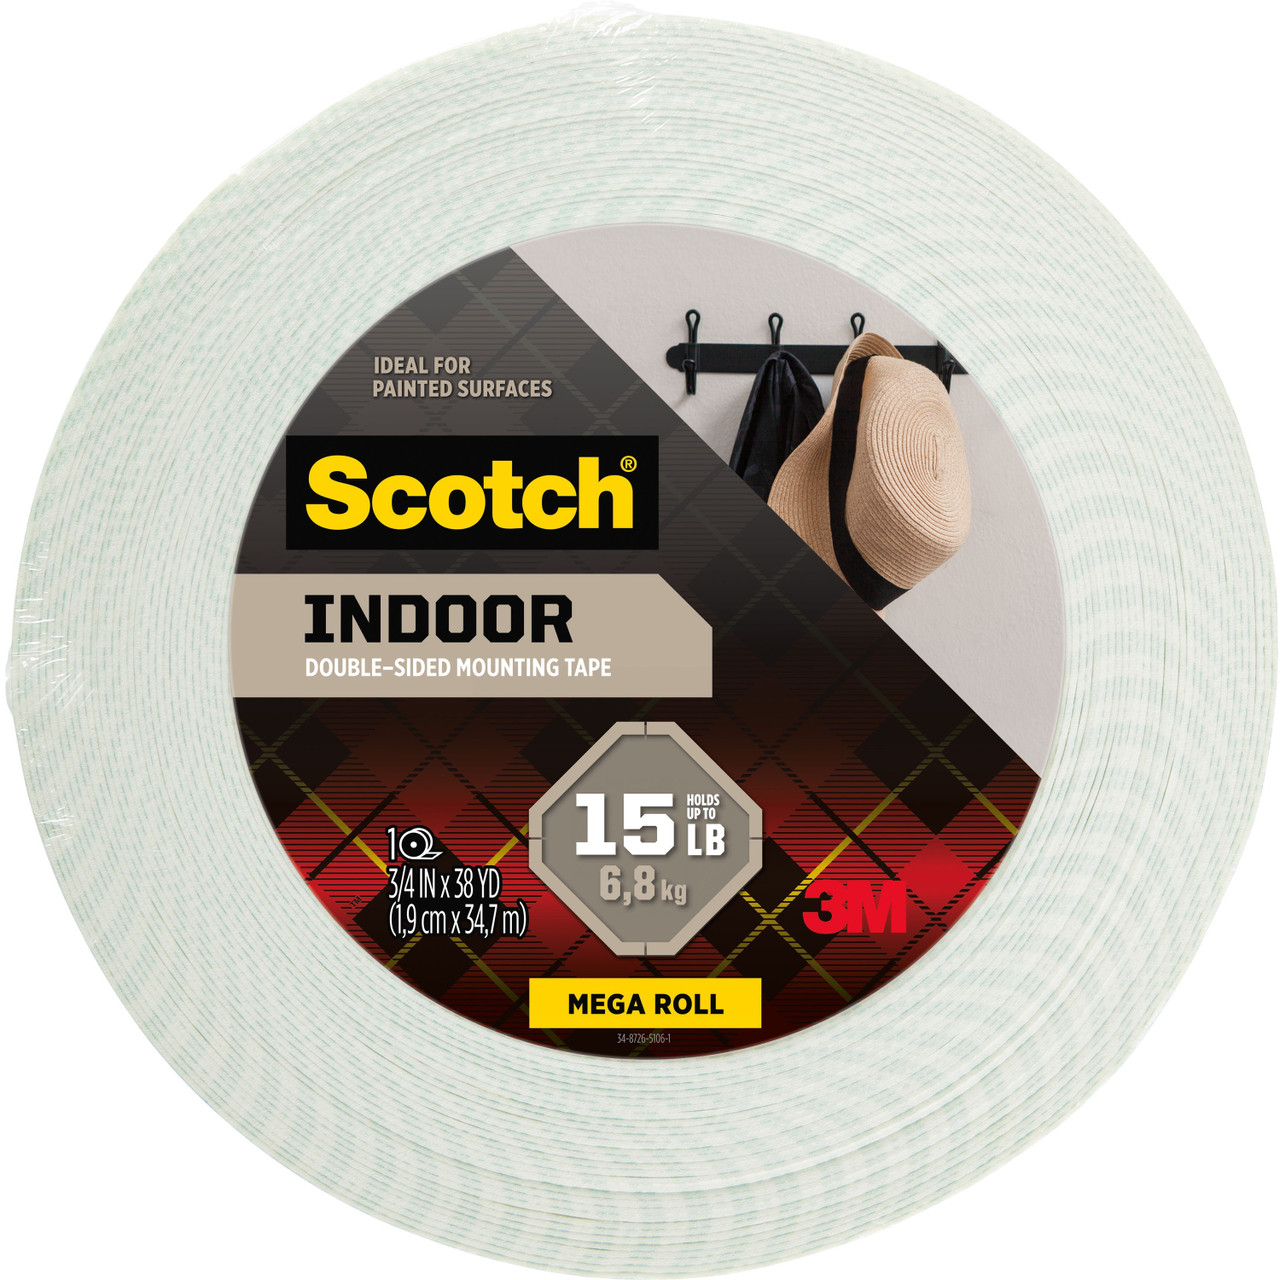 Scotch 665 Permanent Double Sided Tape, 1/2 x 900, 1 Core